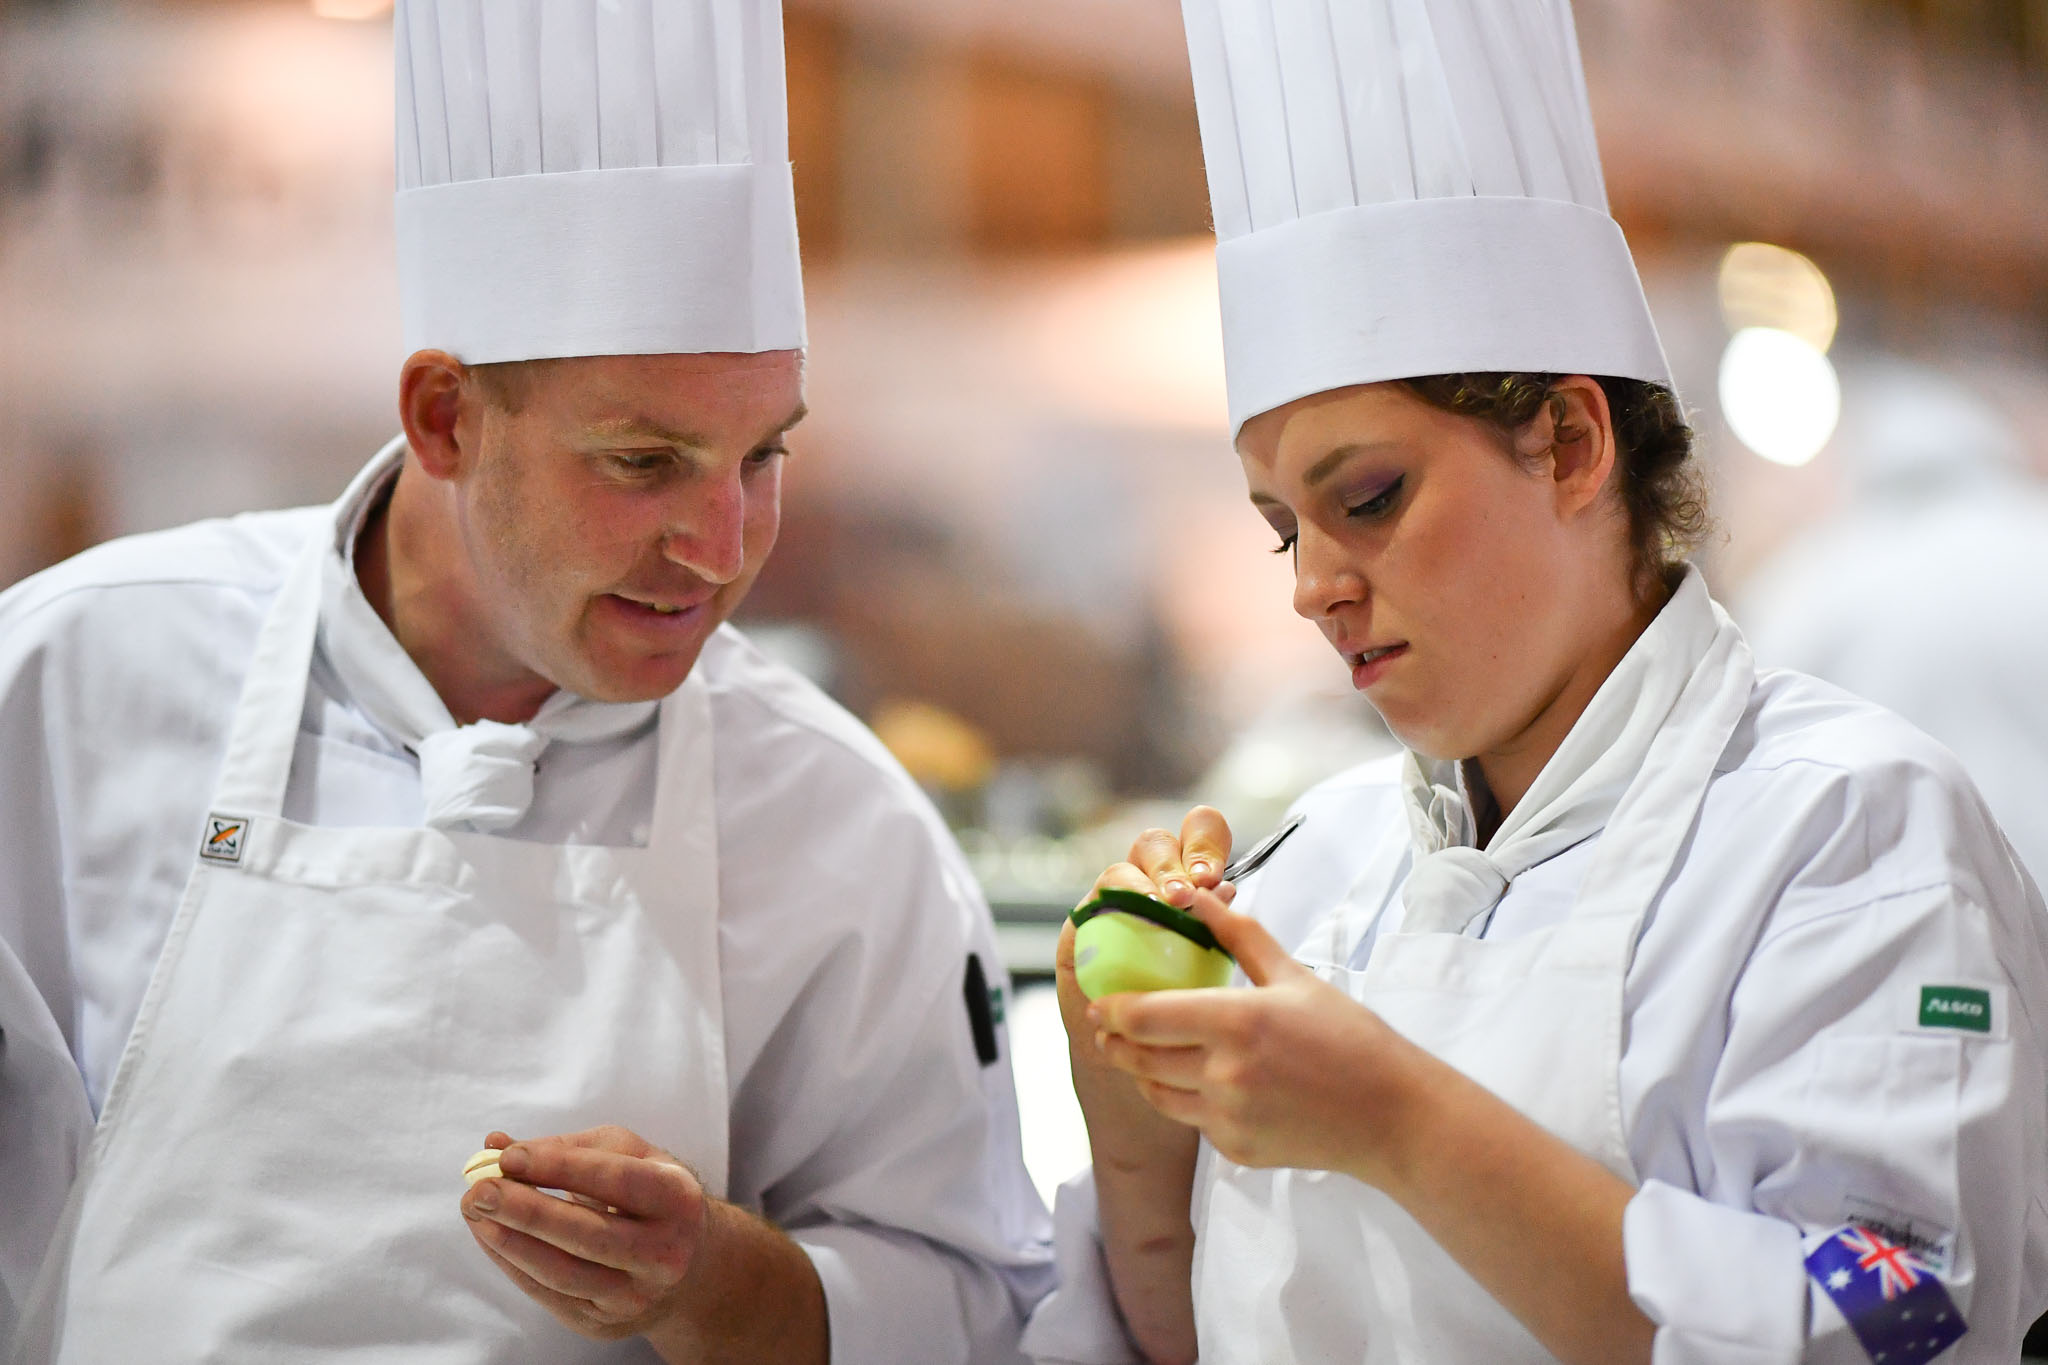 Melbourne, 30 May 2017 - Michael Cole and commis chef Laura Skvor of the Georgie Bass CafÈ & Cookery in Flinders in action at the Australian selection trials of the Bocuse d'Or culinary competition held during the Food Service Australia show at the Royal Exhibition Building in Melbourne, Australia. Photo Sydney Low